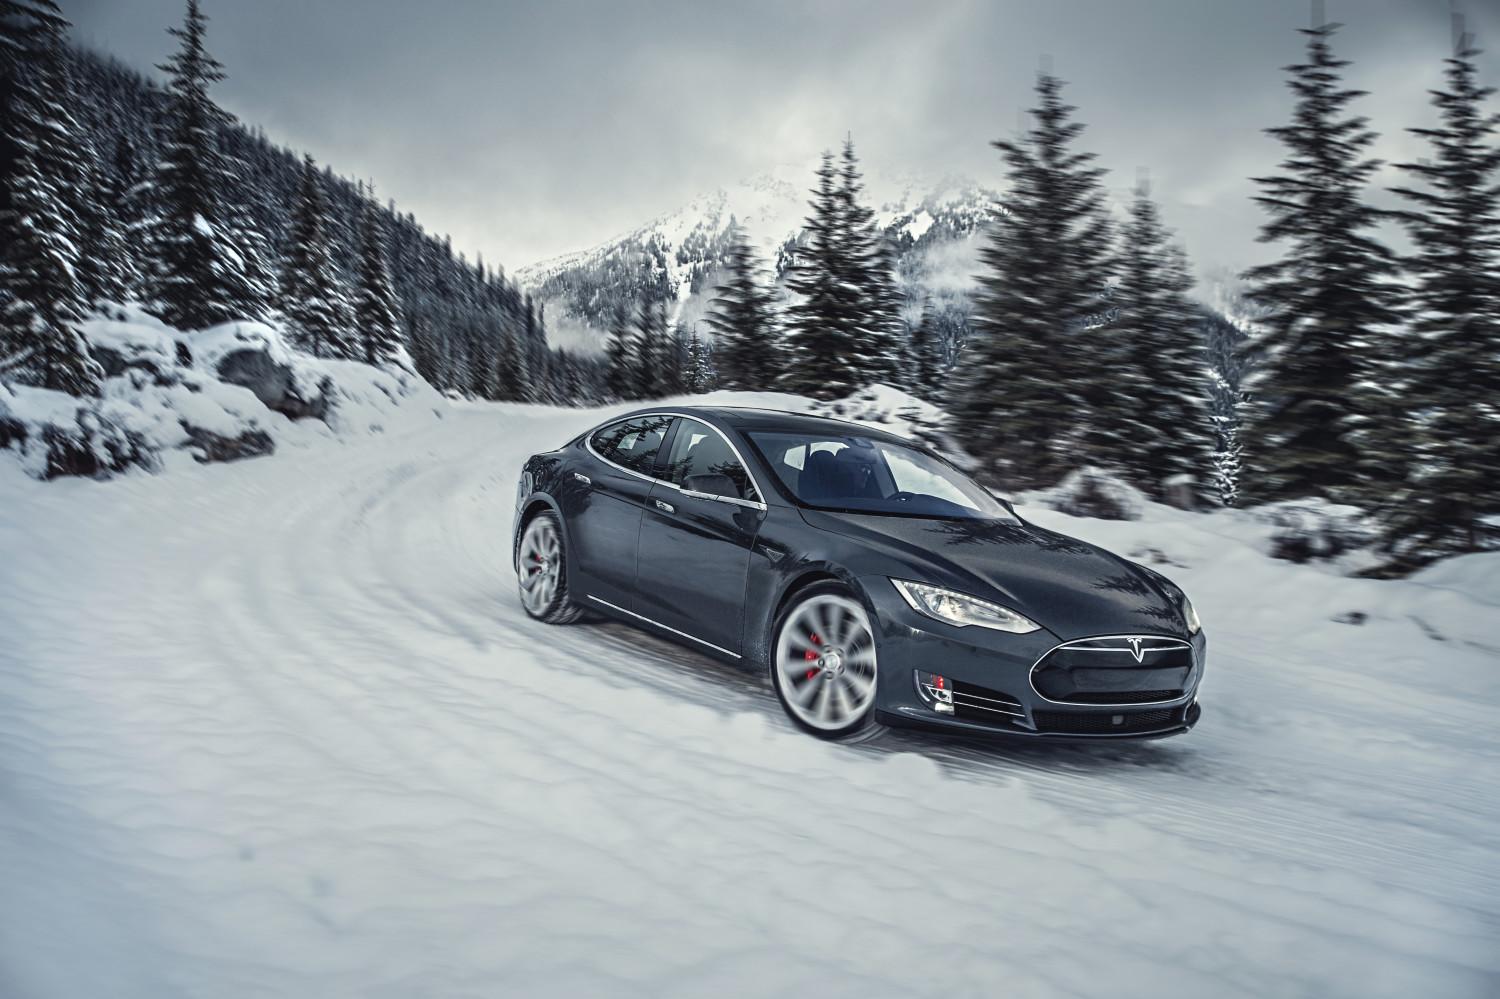 The Tesla Model S P85d And Dodge Charger Srt Hellcat Are Two